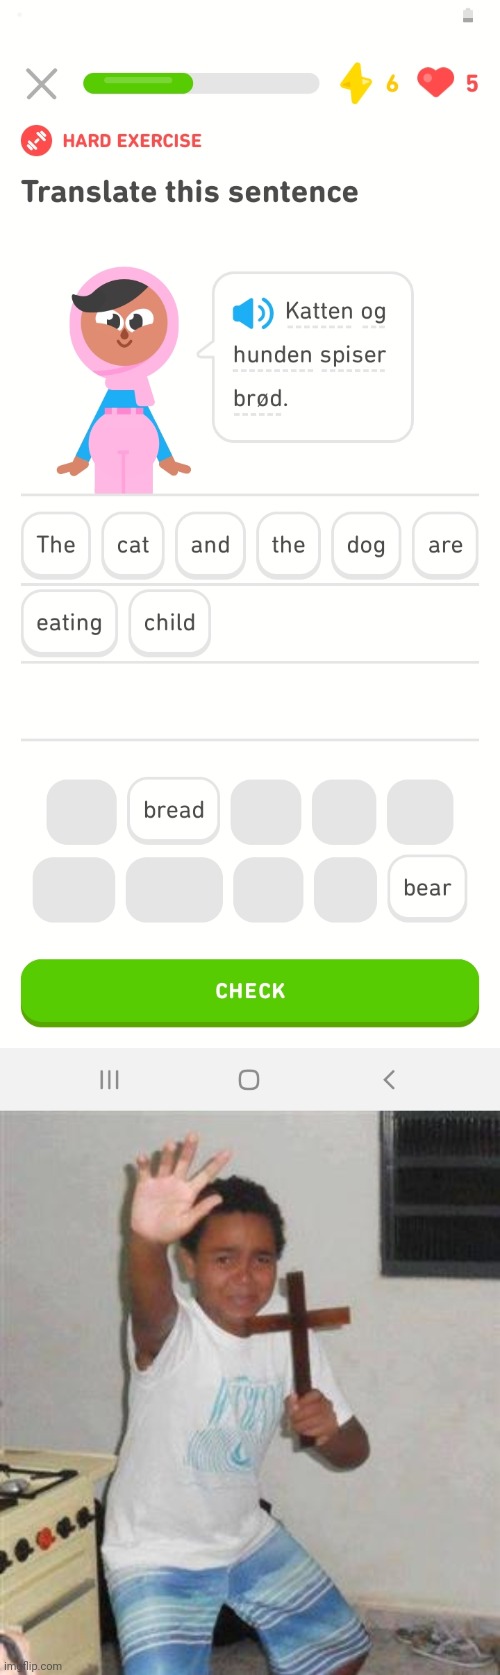 The cat and the dog are eating child | image tagged in the cat and the dog are eating child,scared kid,duolingo | made w/ Imgflip meme maker